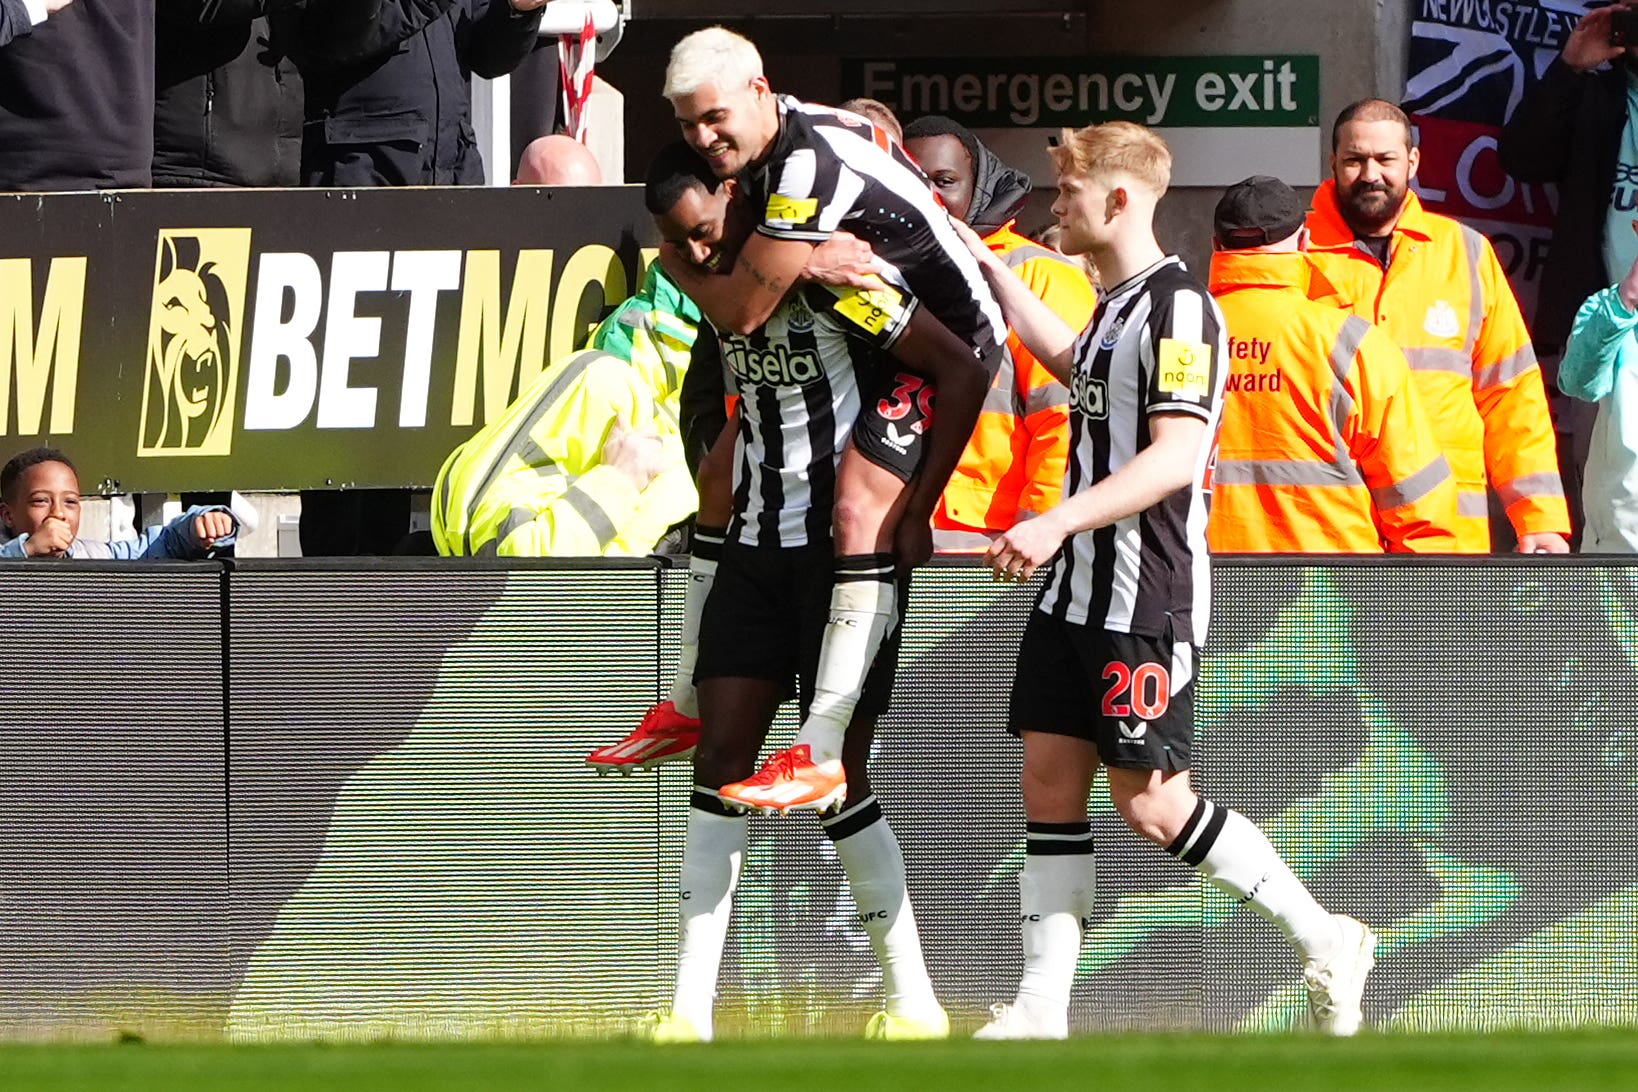 sheffield united relegated to championship after heavy defeat at newcastle